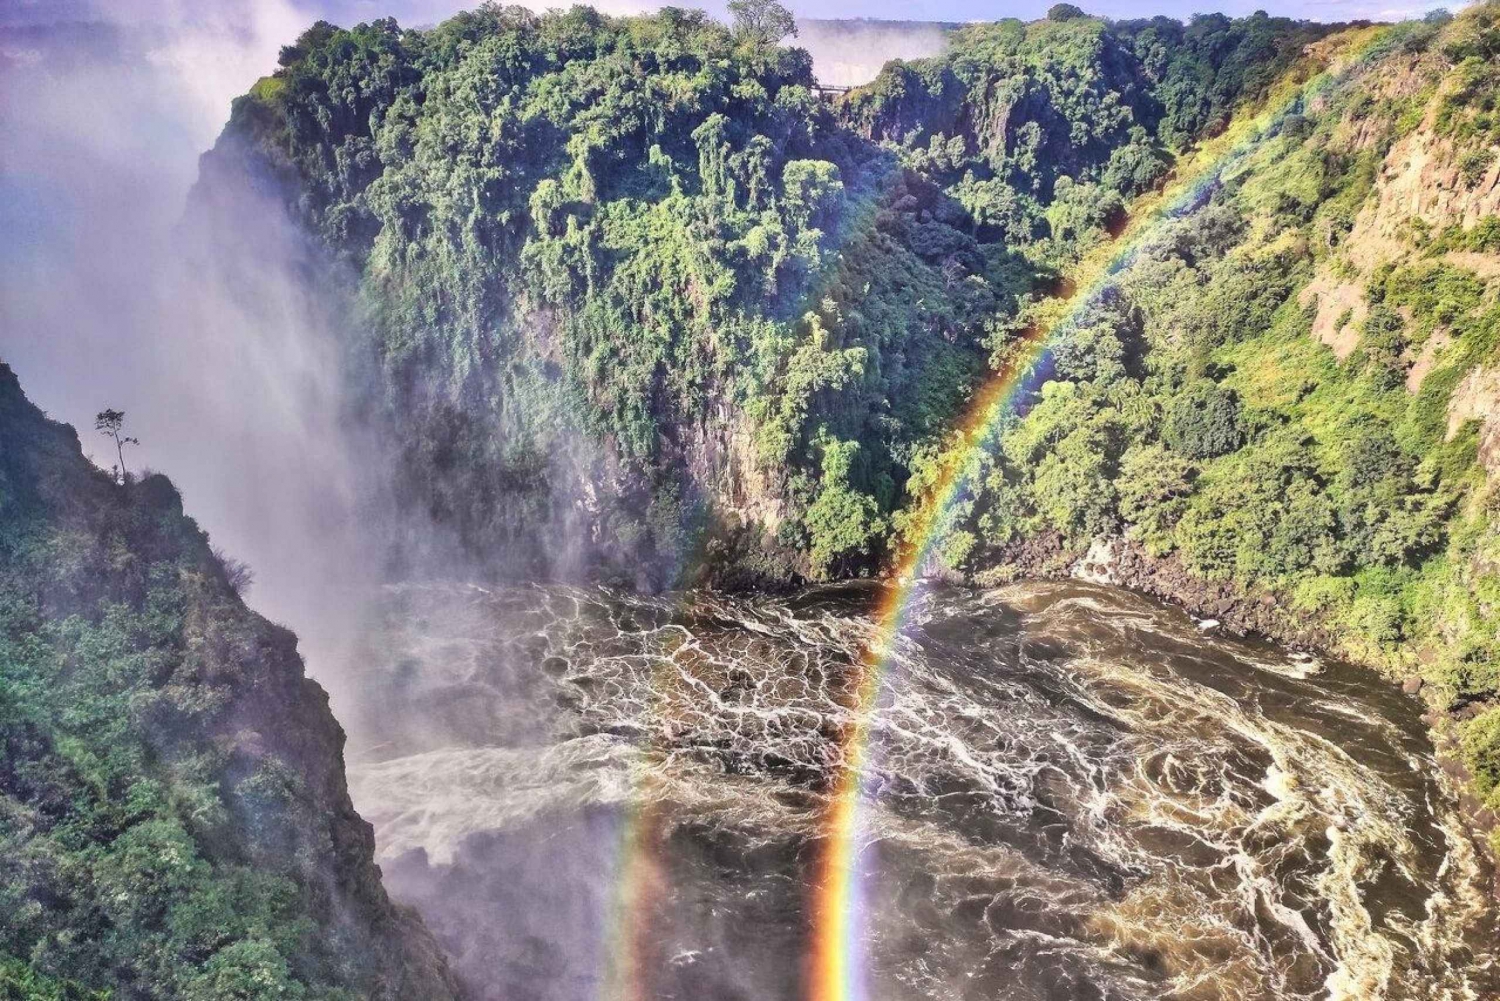 Victoria Falls: Guided Tour of the Falls